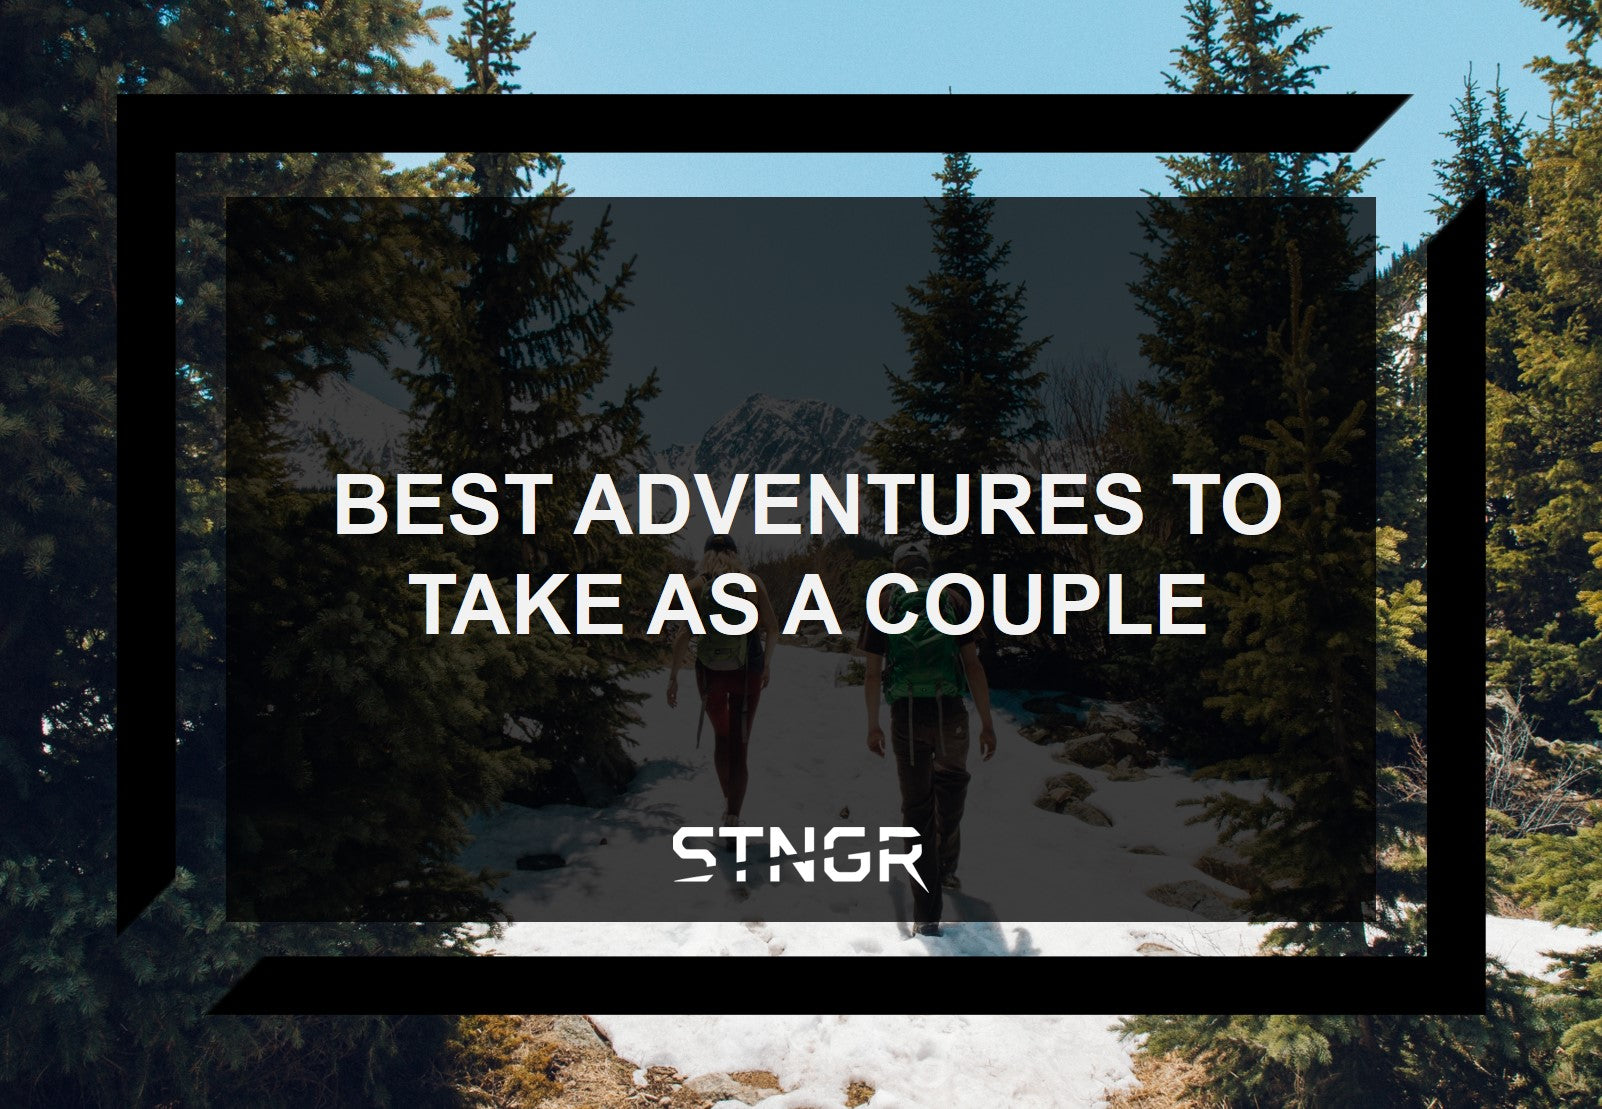 Best Adventures to Take as a Couple